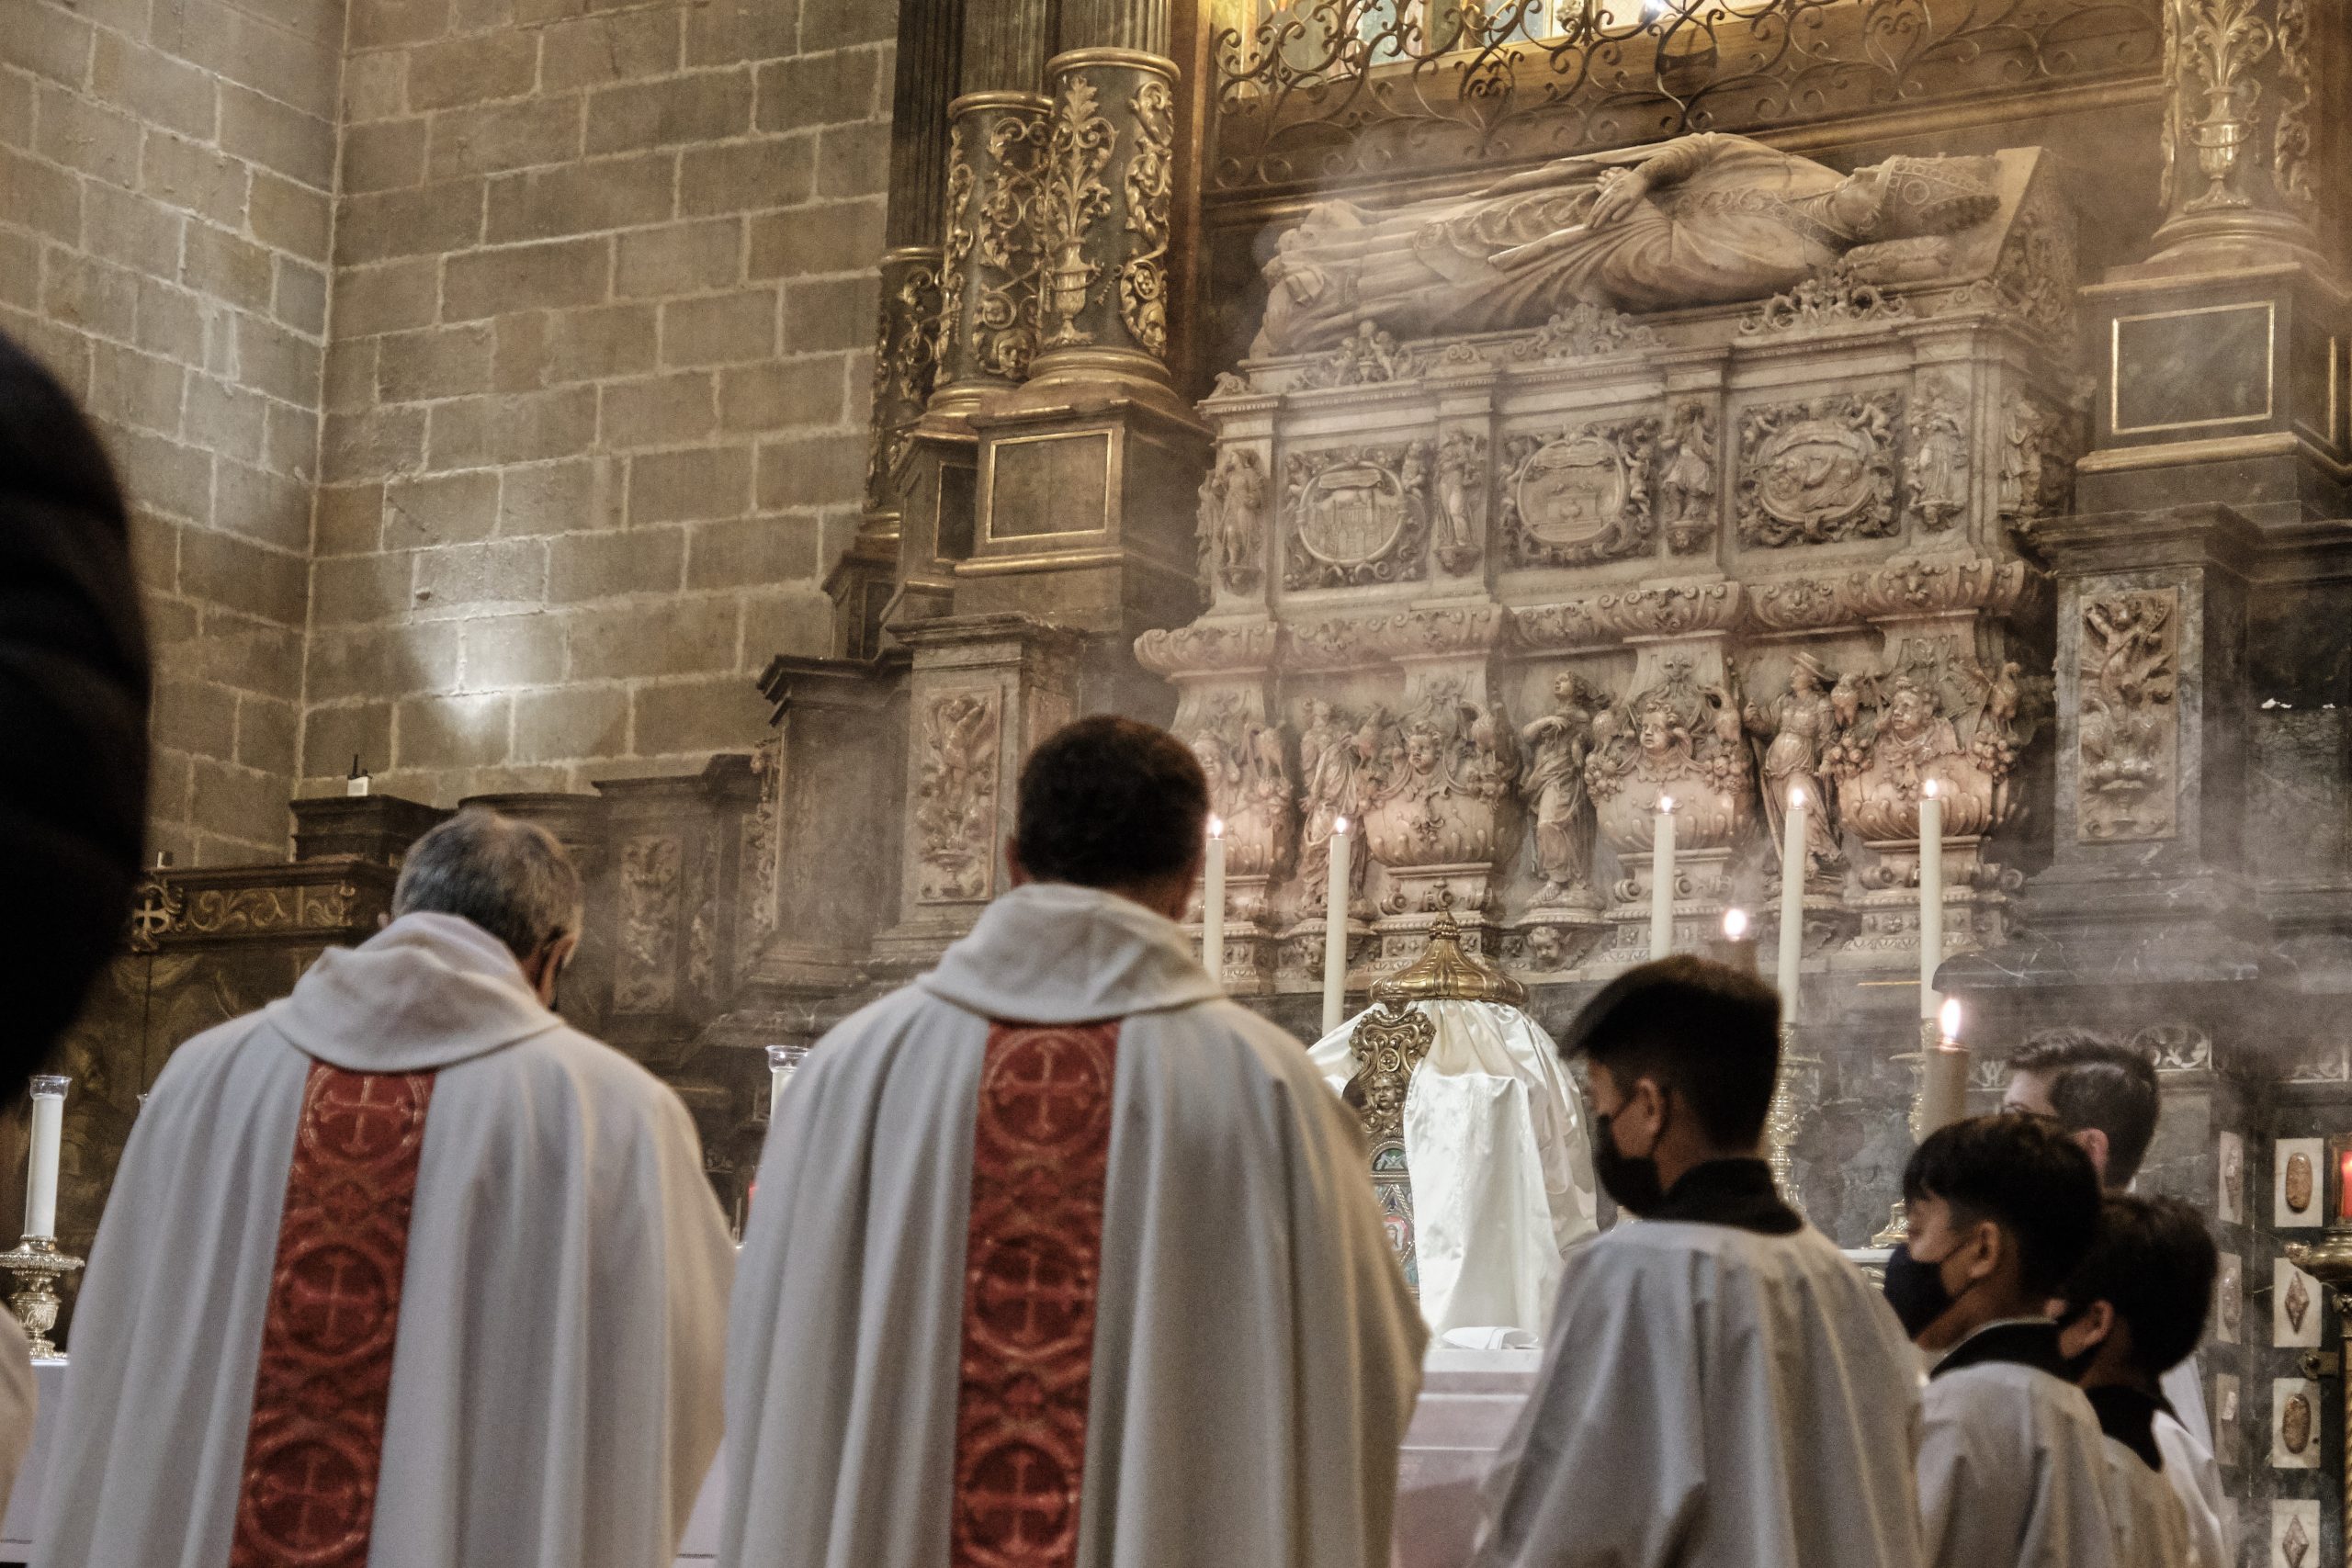 5th march | Celebration of Saint Ollegarius, Bishop of Barcelona